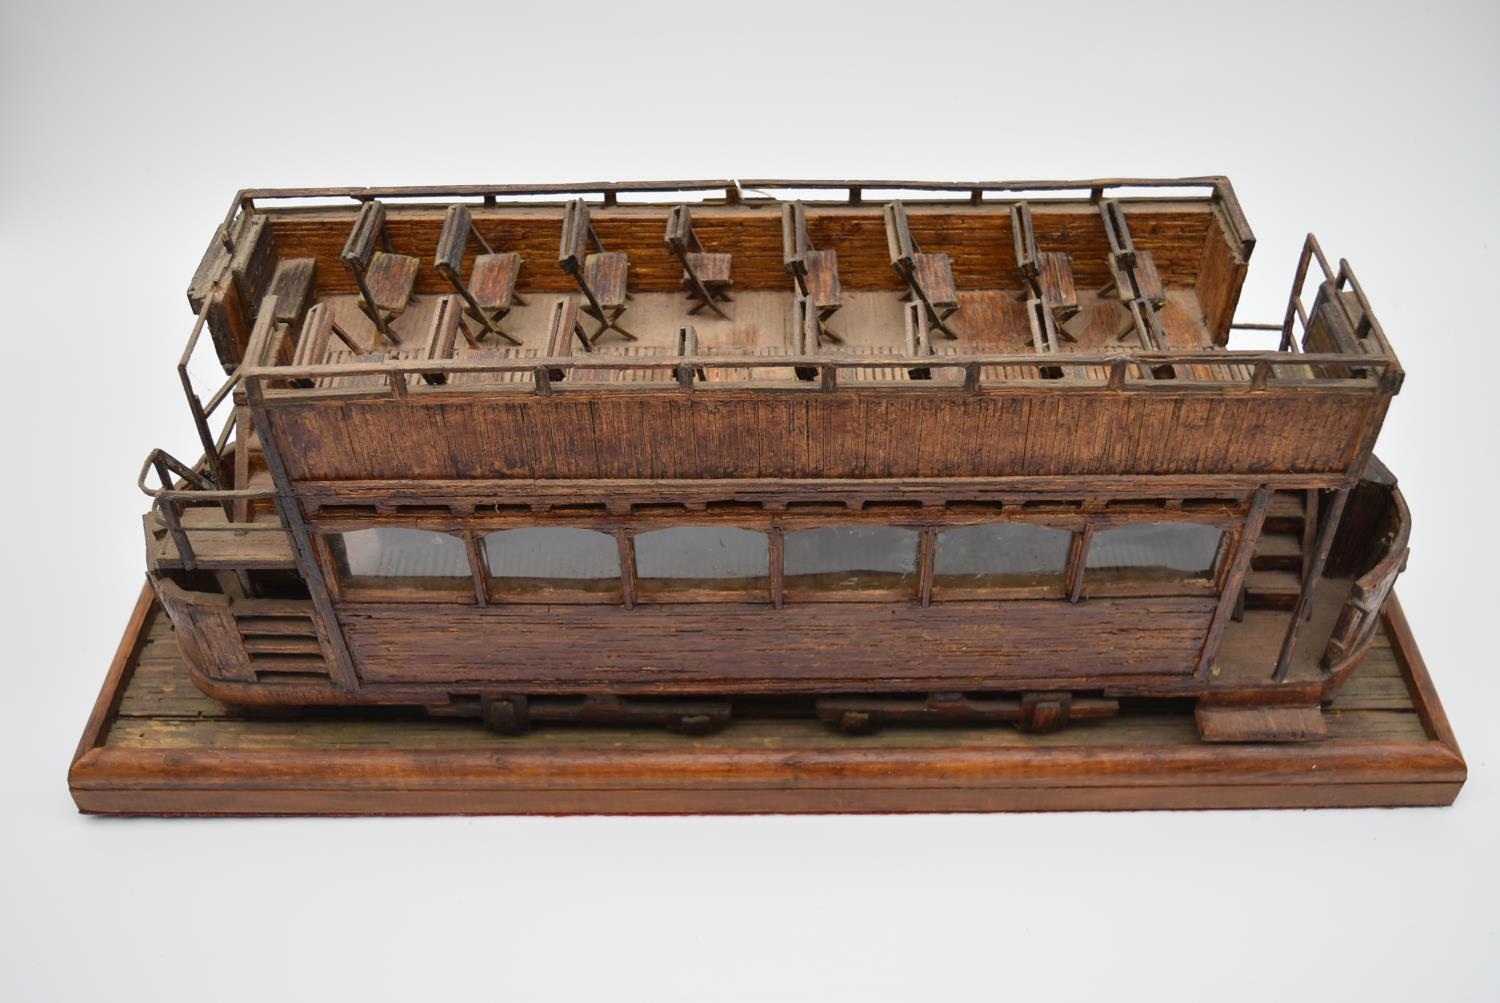 A 19th century style open topped tram made from matchsticks. H.24 W.60 D.15cm - Image 3 of 7